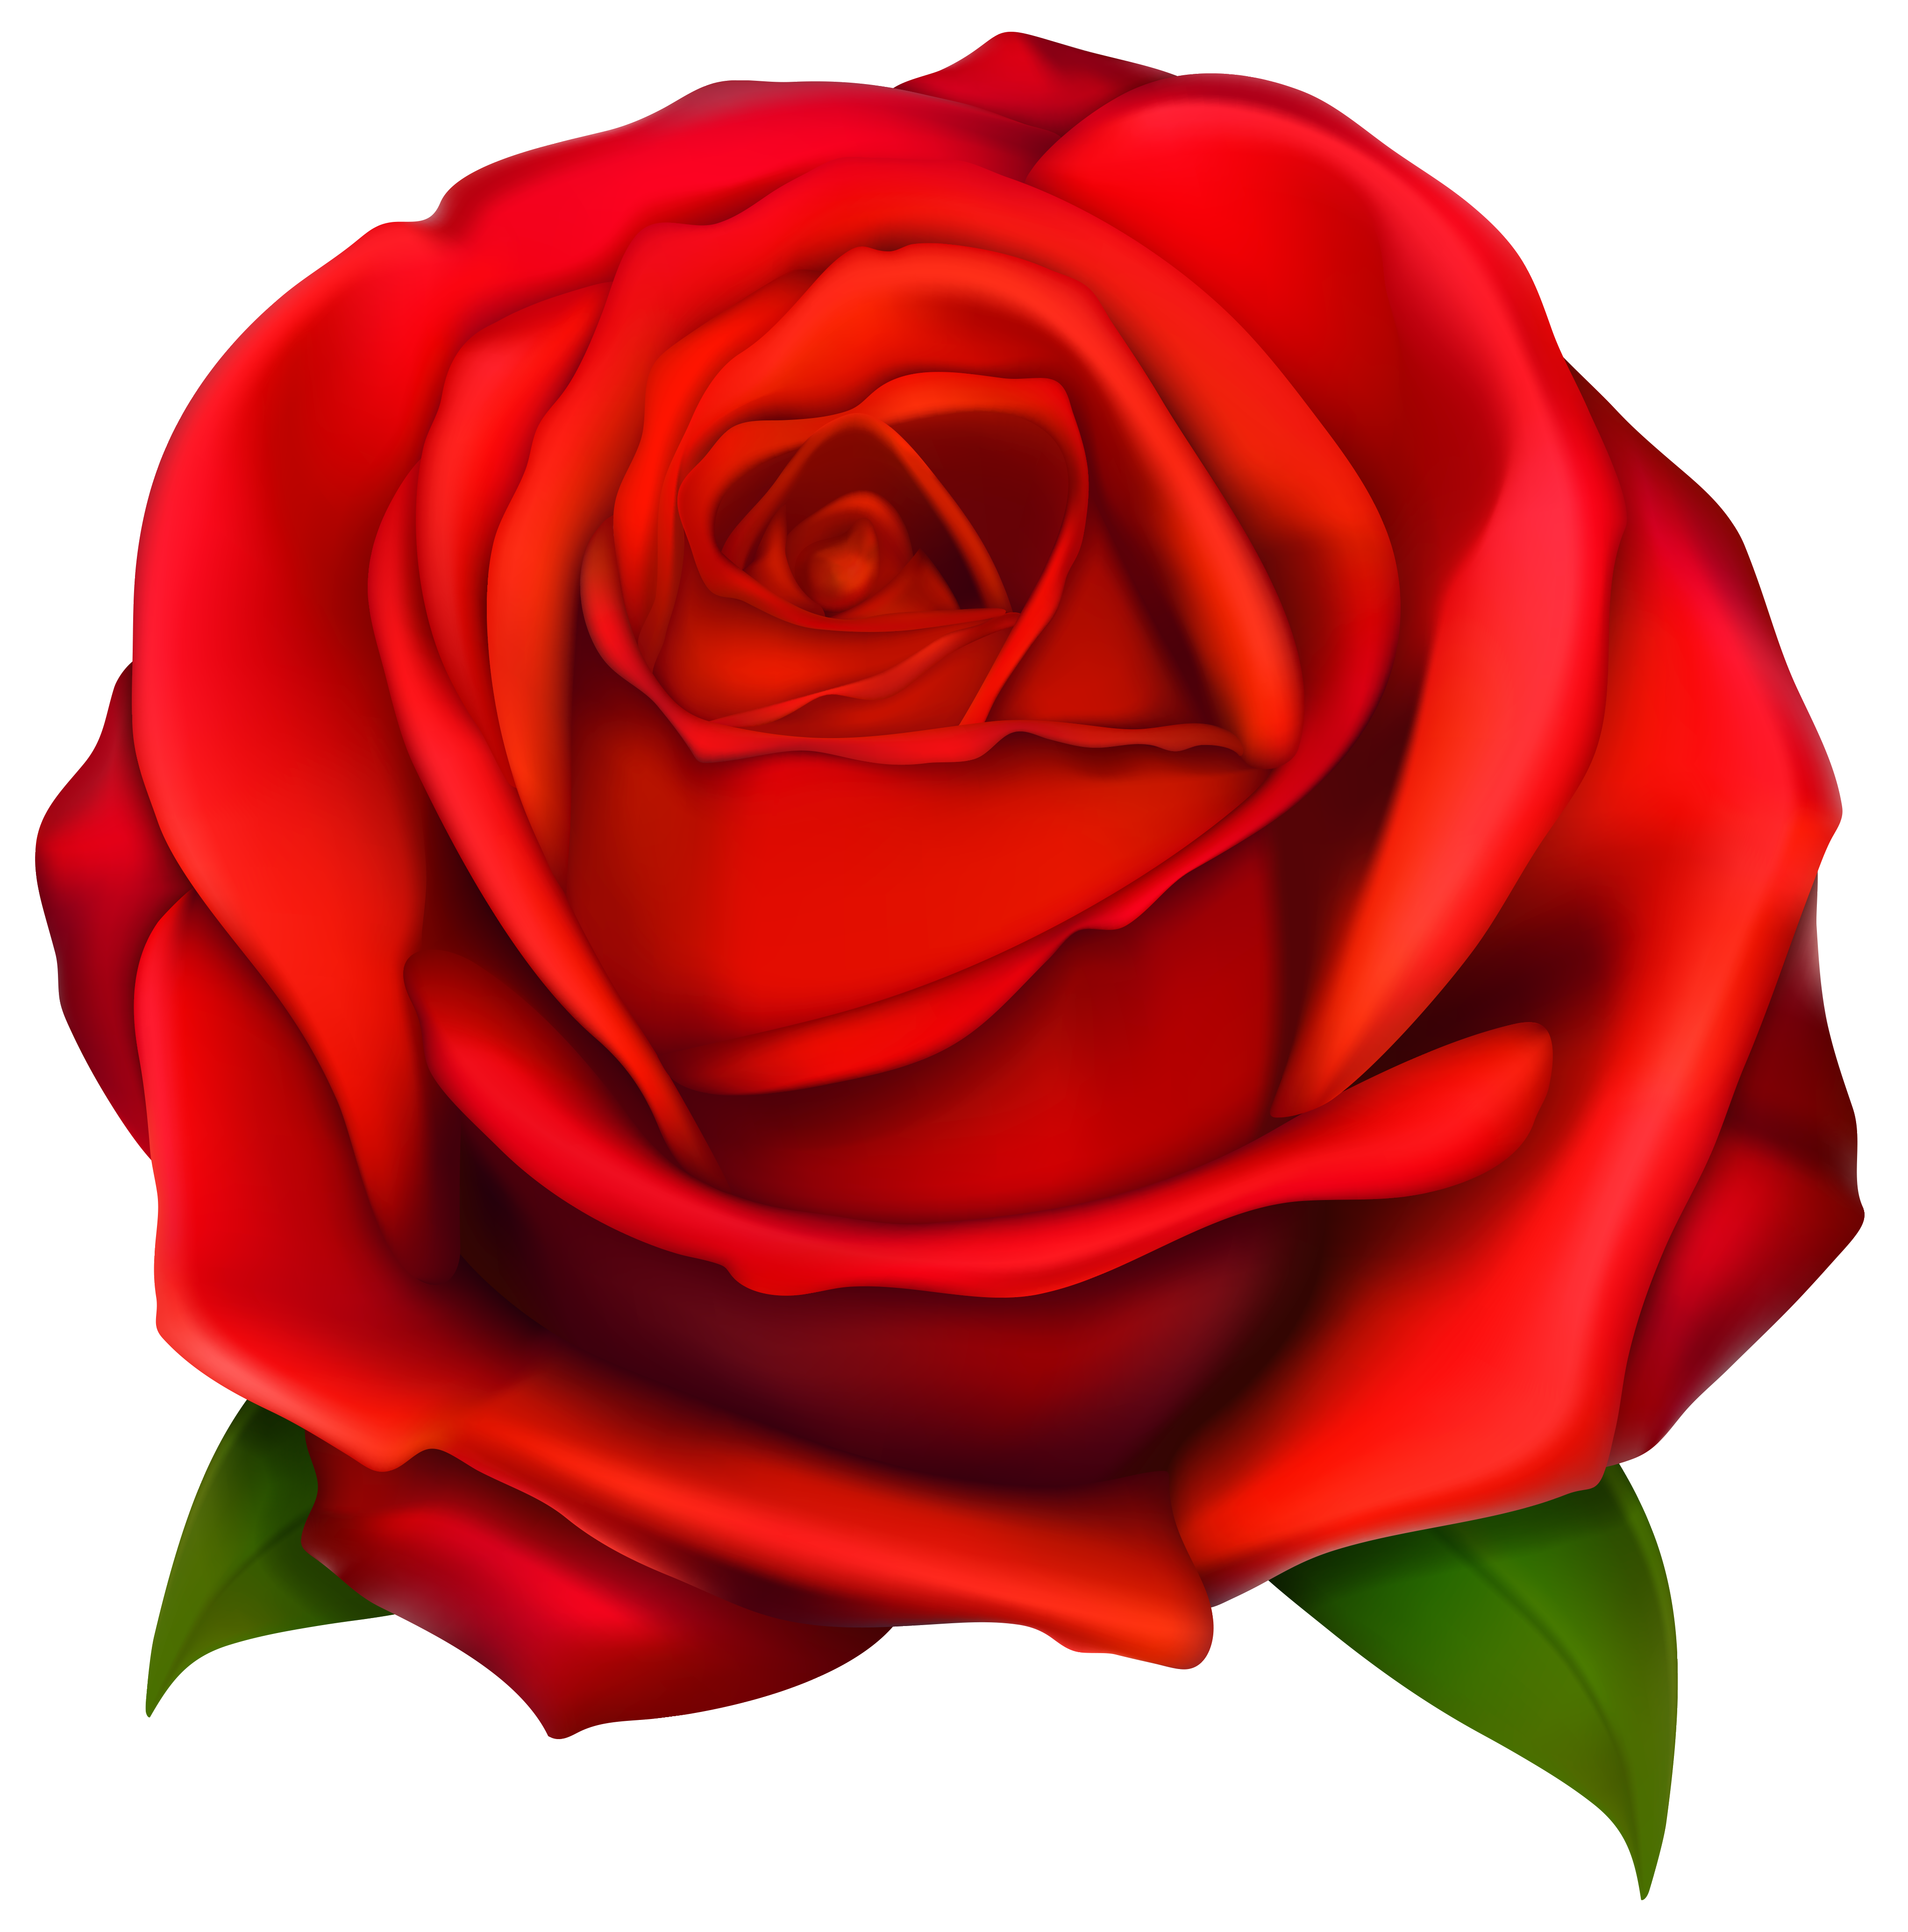 Image of clip art red rose 2 red roses clip art images free.